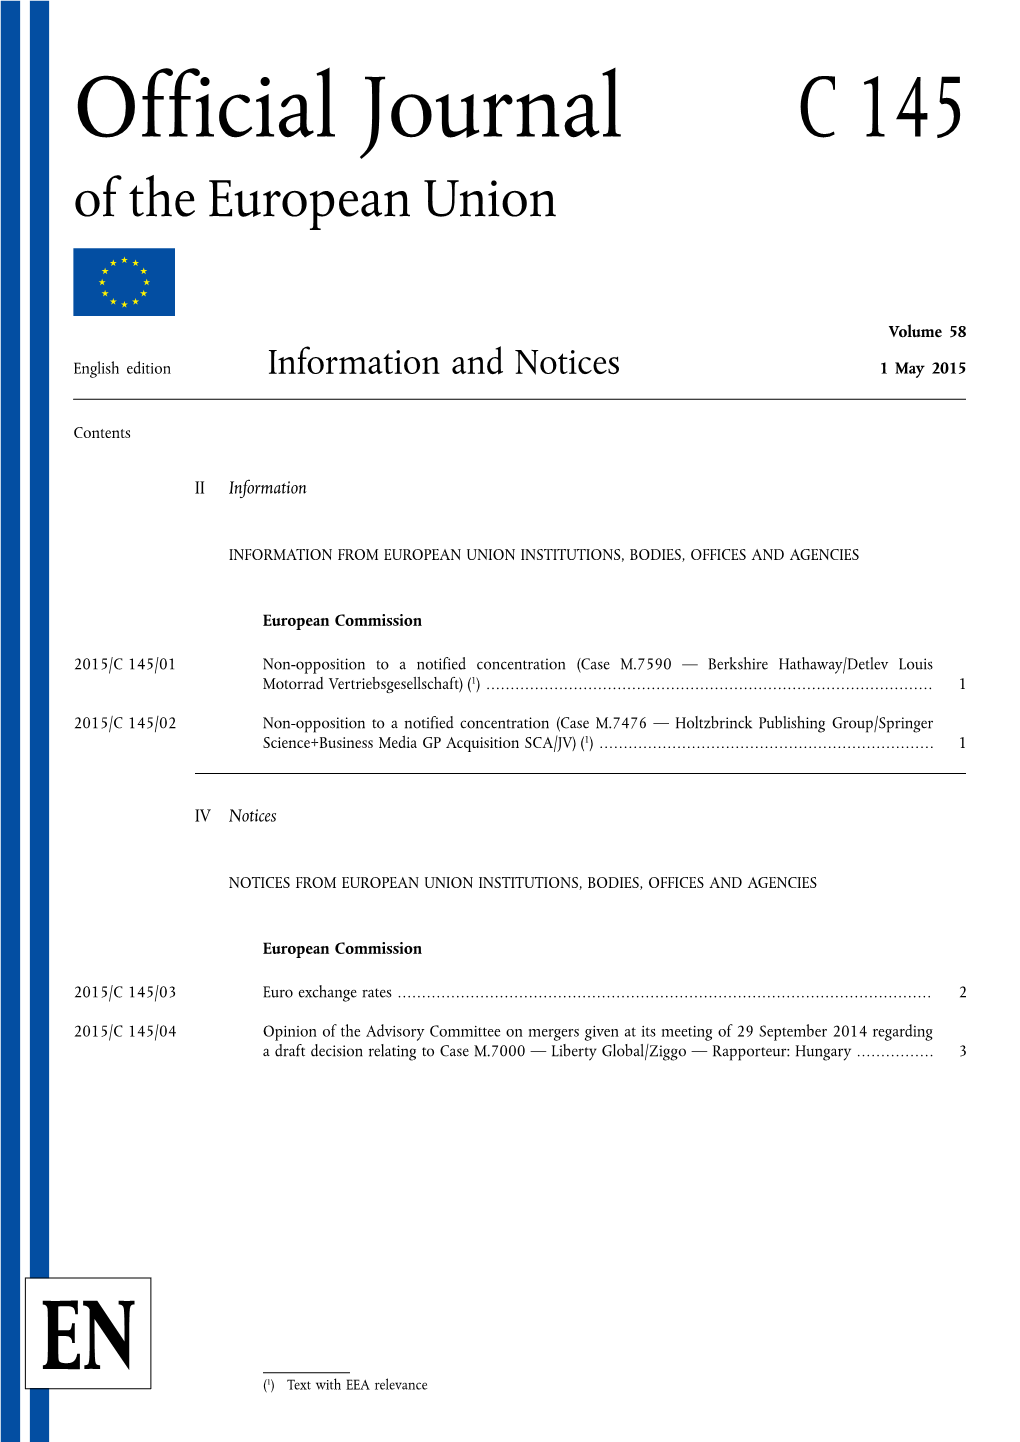 Official Journal C 145 of the European Union